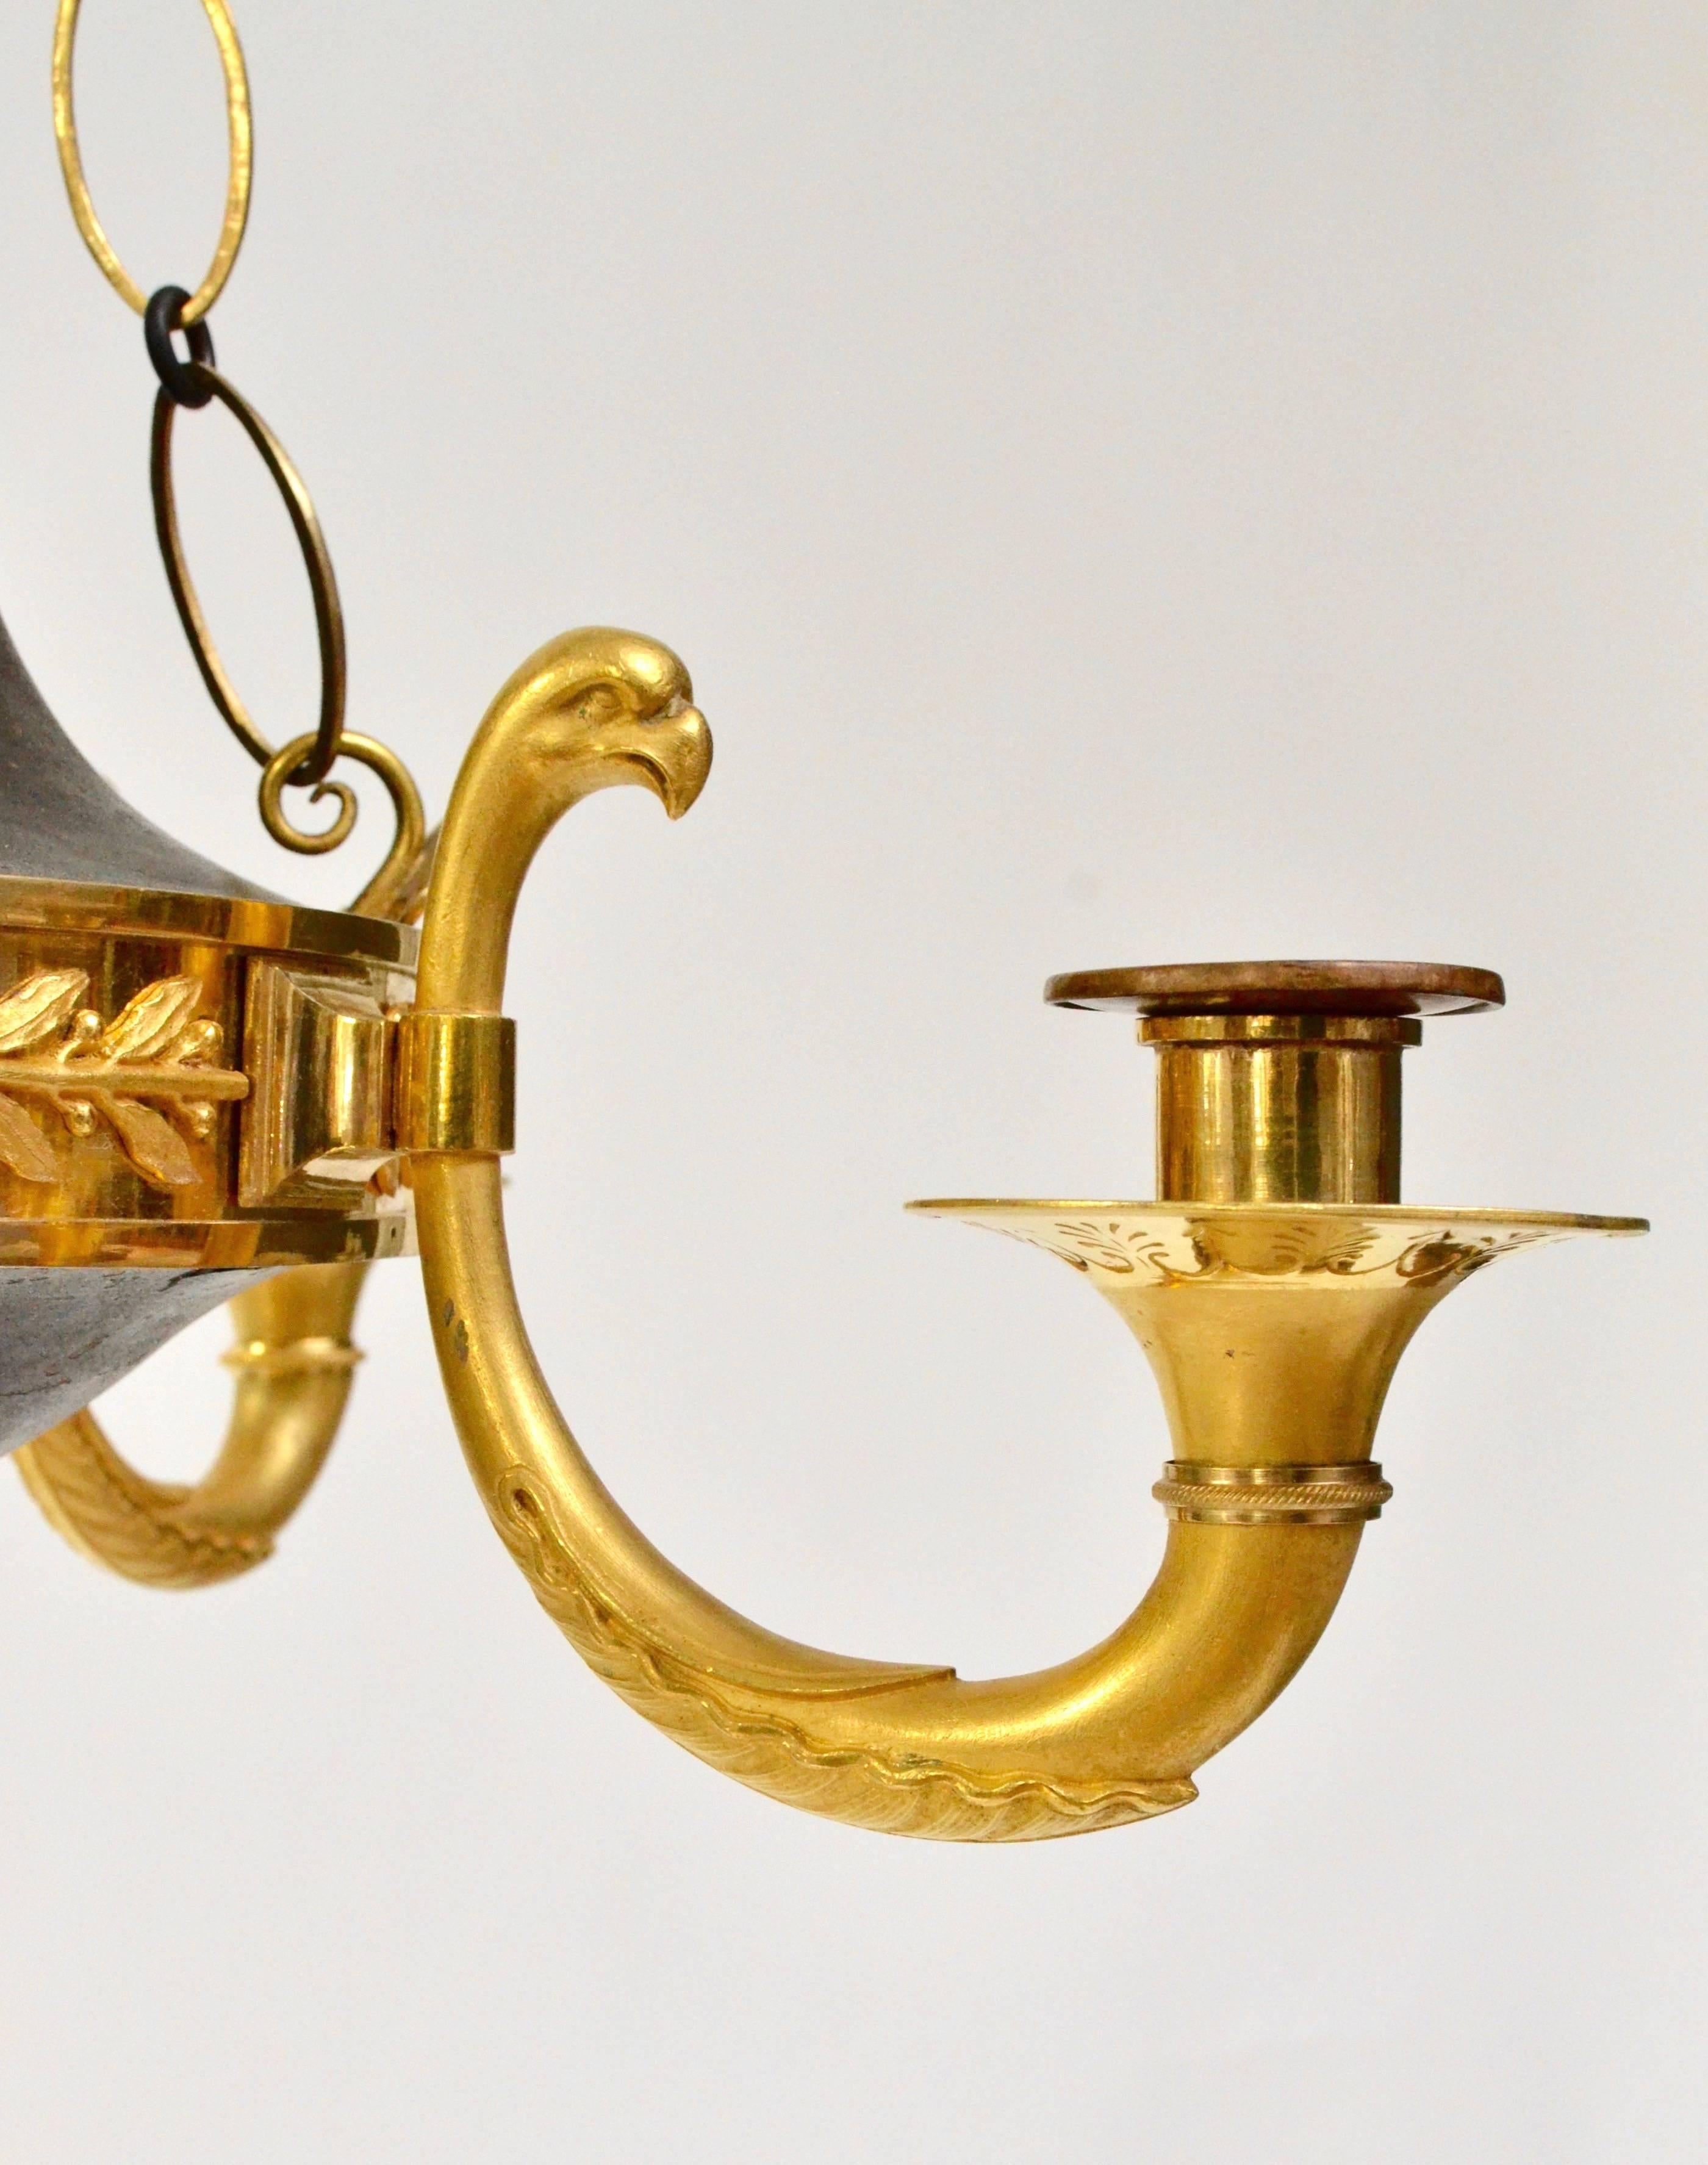 Rare Russian Gilt and Patinated Bronze Chandelier, Empire Period 1